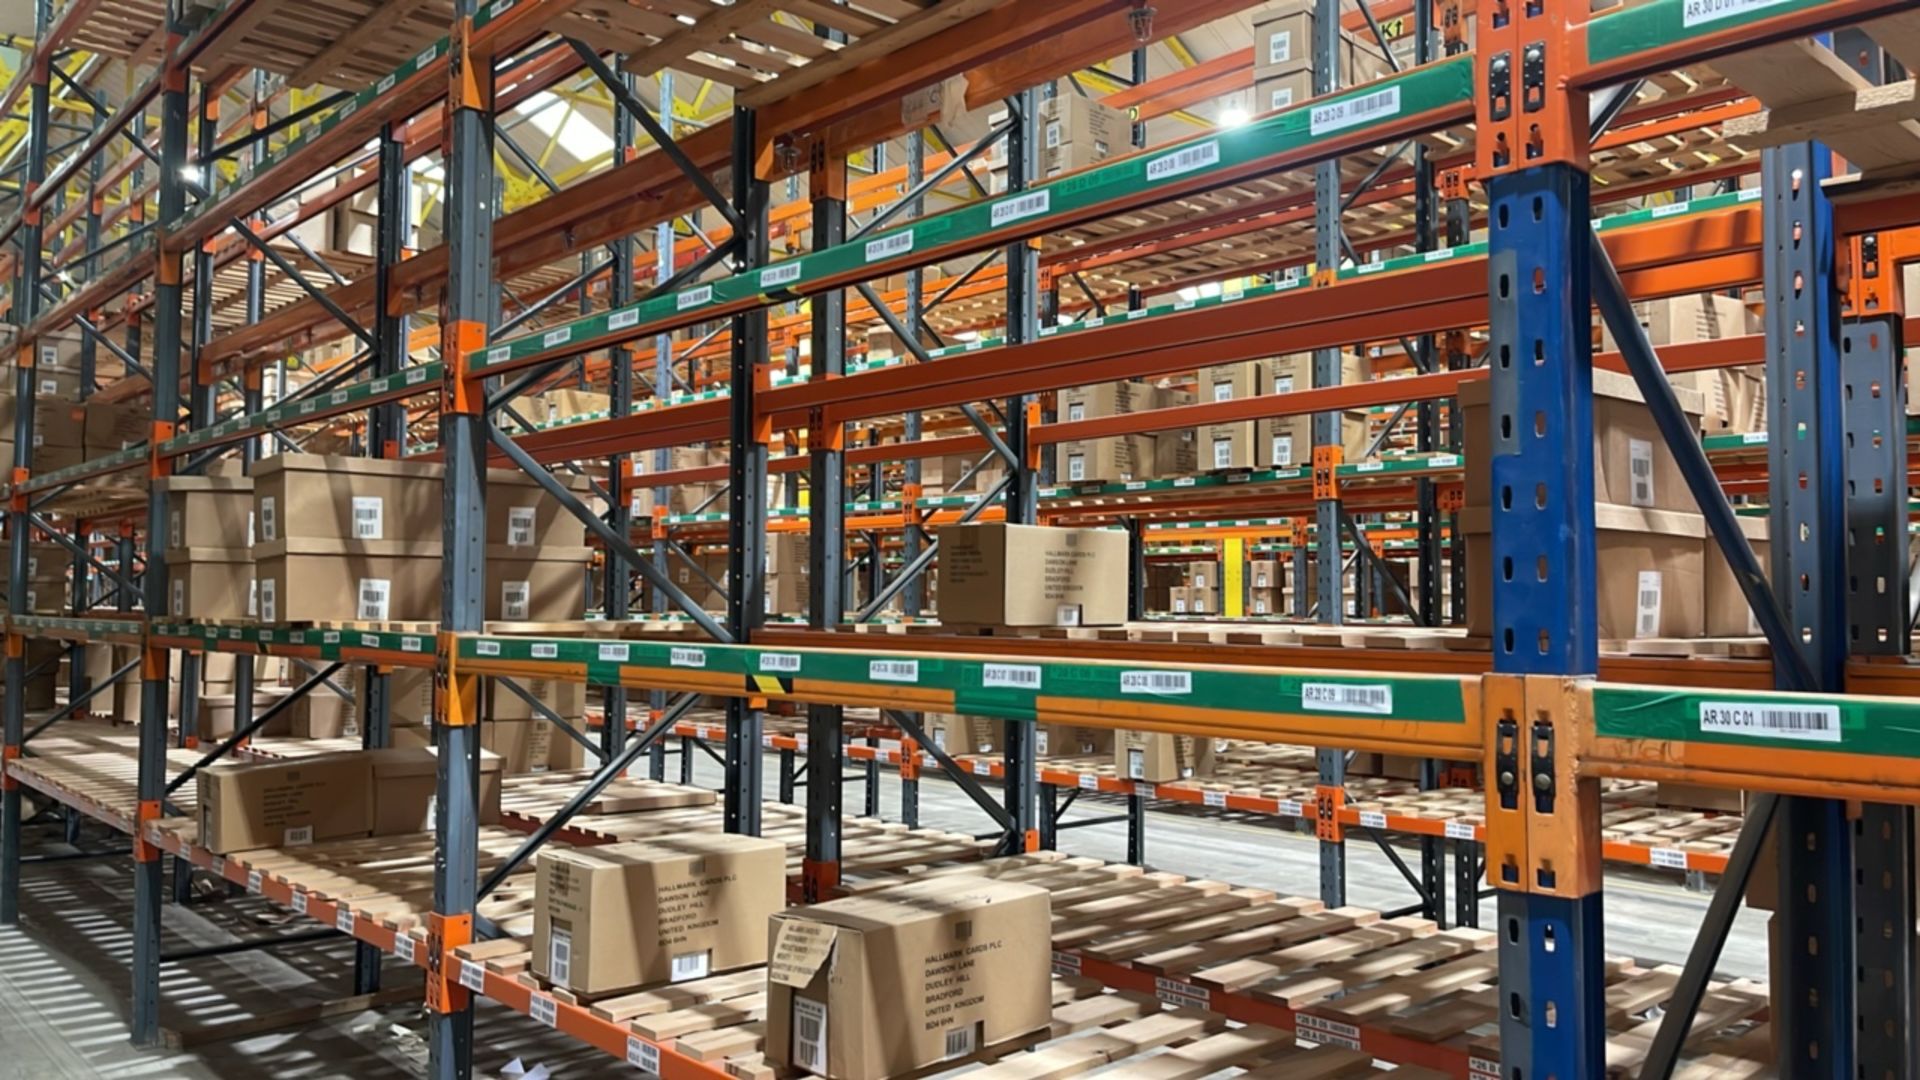 Run Of 44 Bays Of Back To Back Boltless Industrial Pallet Racking - Image 12 of 13